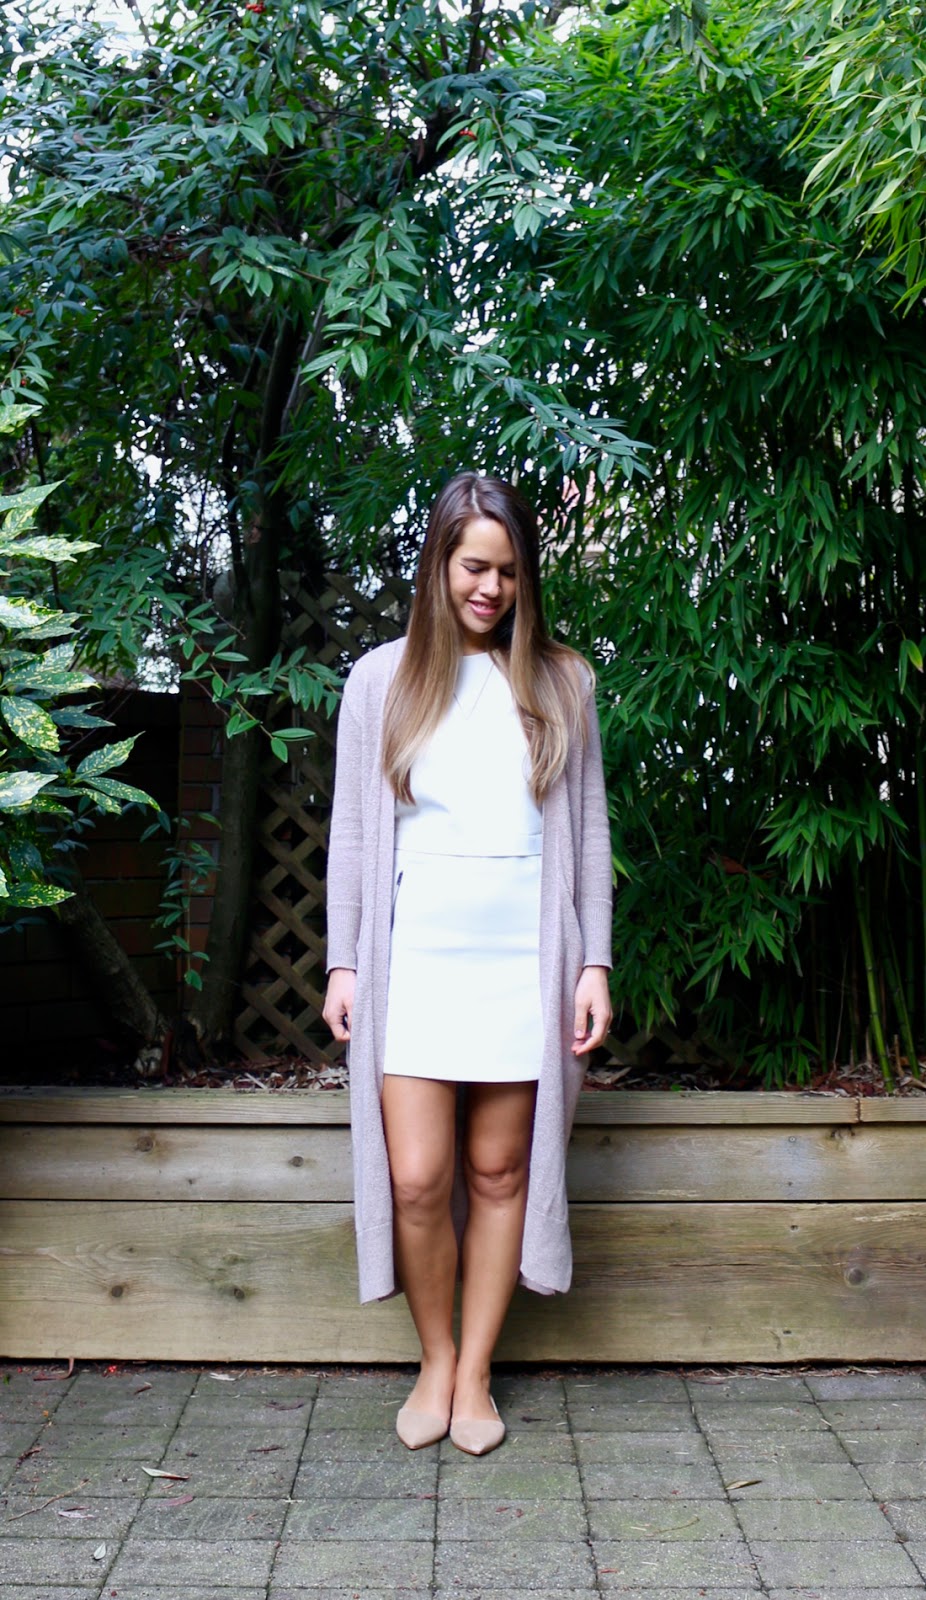 Jules in Flats - Duster Cardigan with White Shift Dress (Business Casual Spring Workwear on a Budget) 